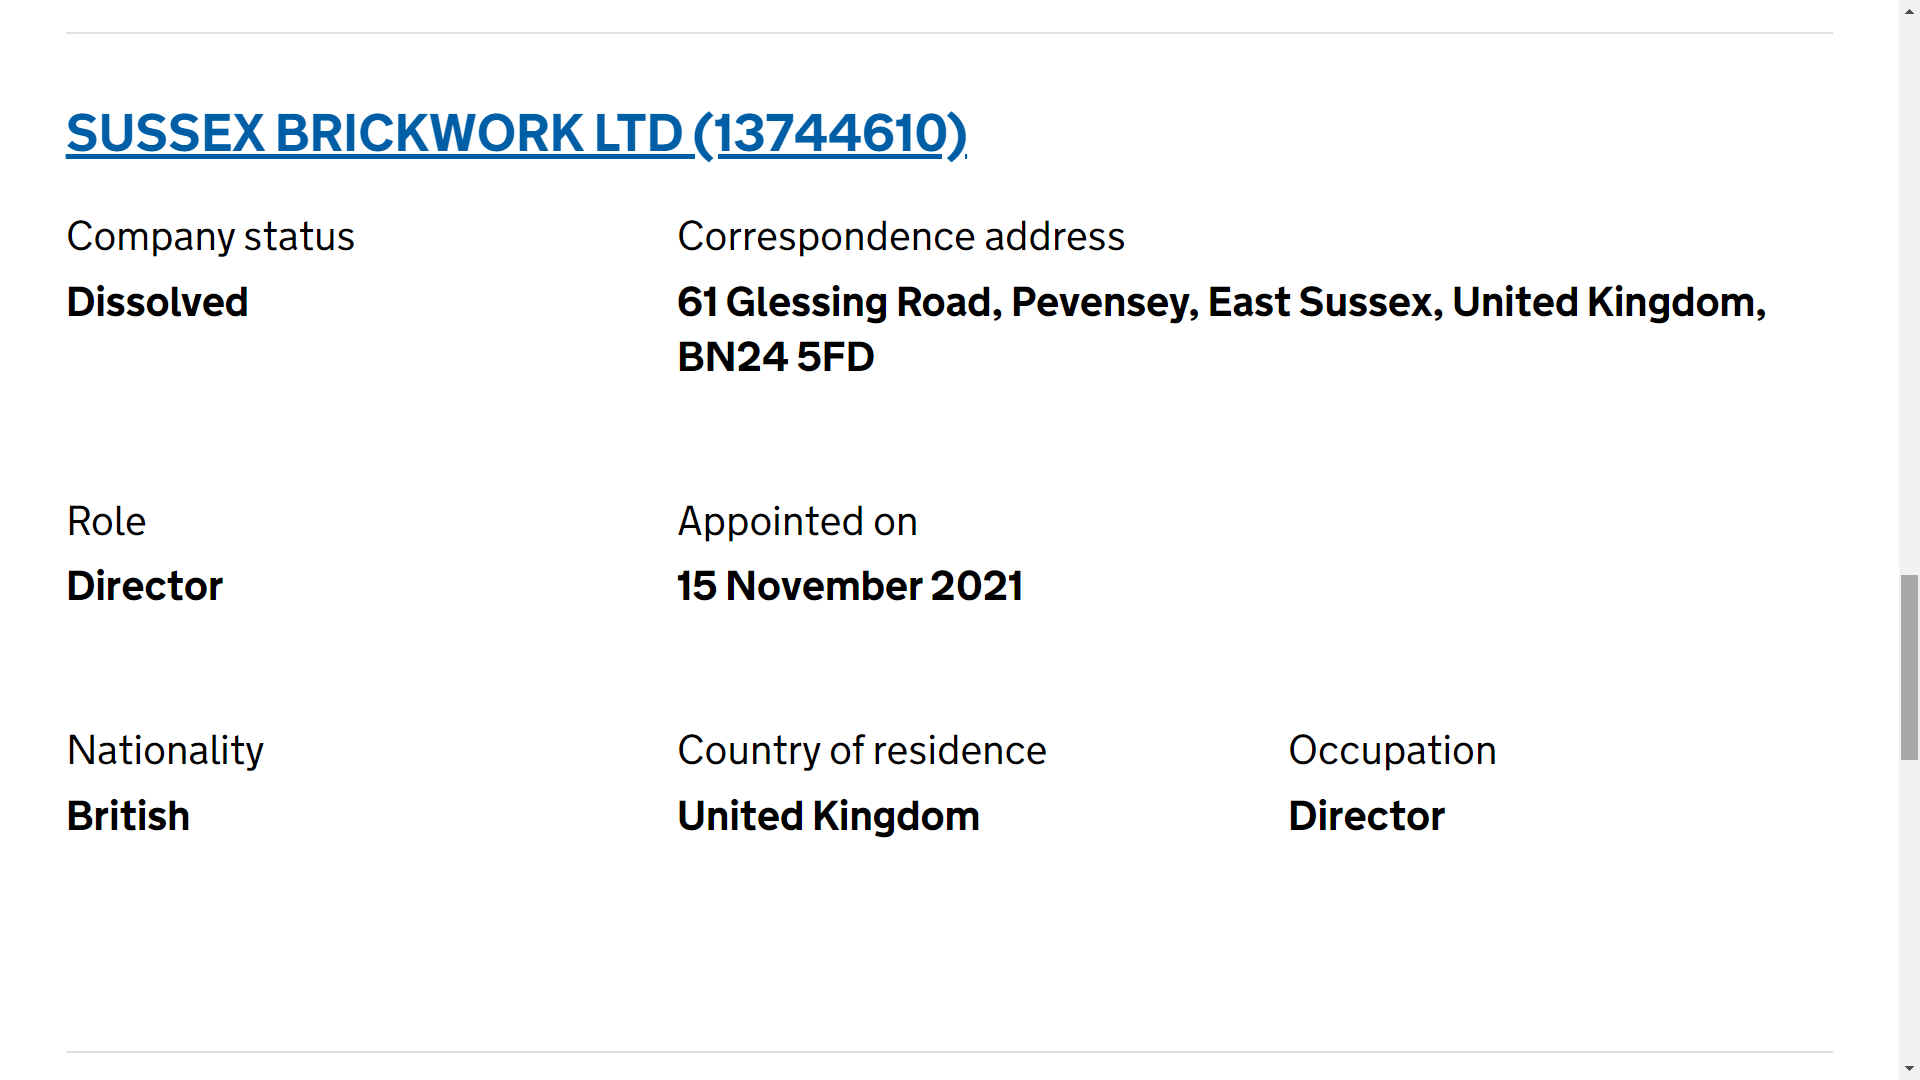 Terry Valeriano was the sole director of Sussex Brickworks Limited number 13744610 struck off and dissolved, bankrupt or insolvent